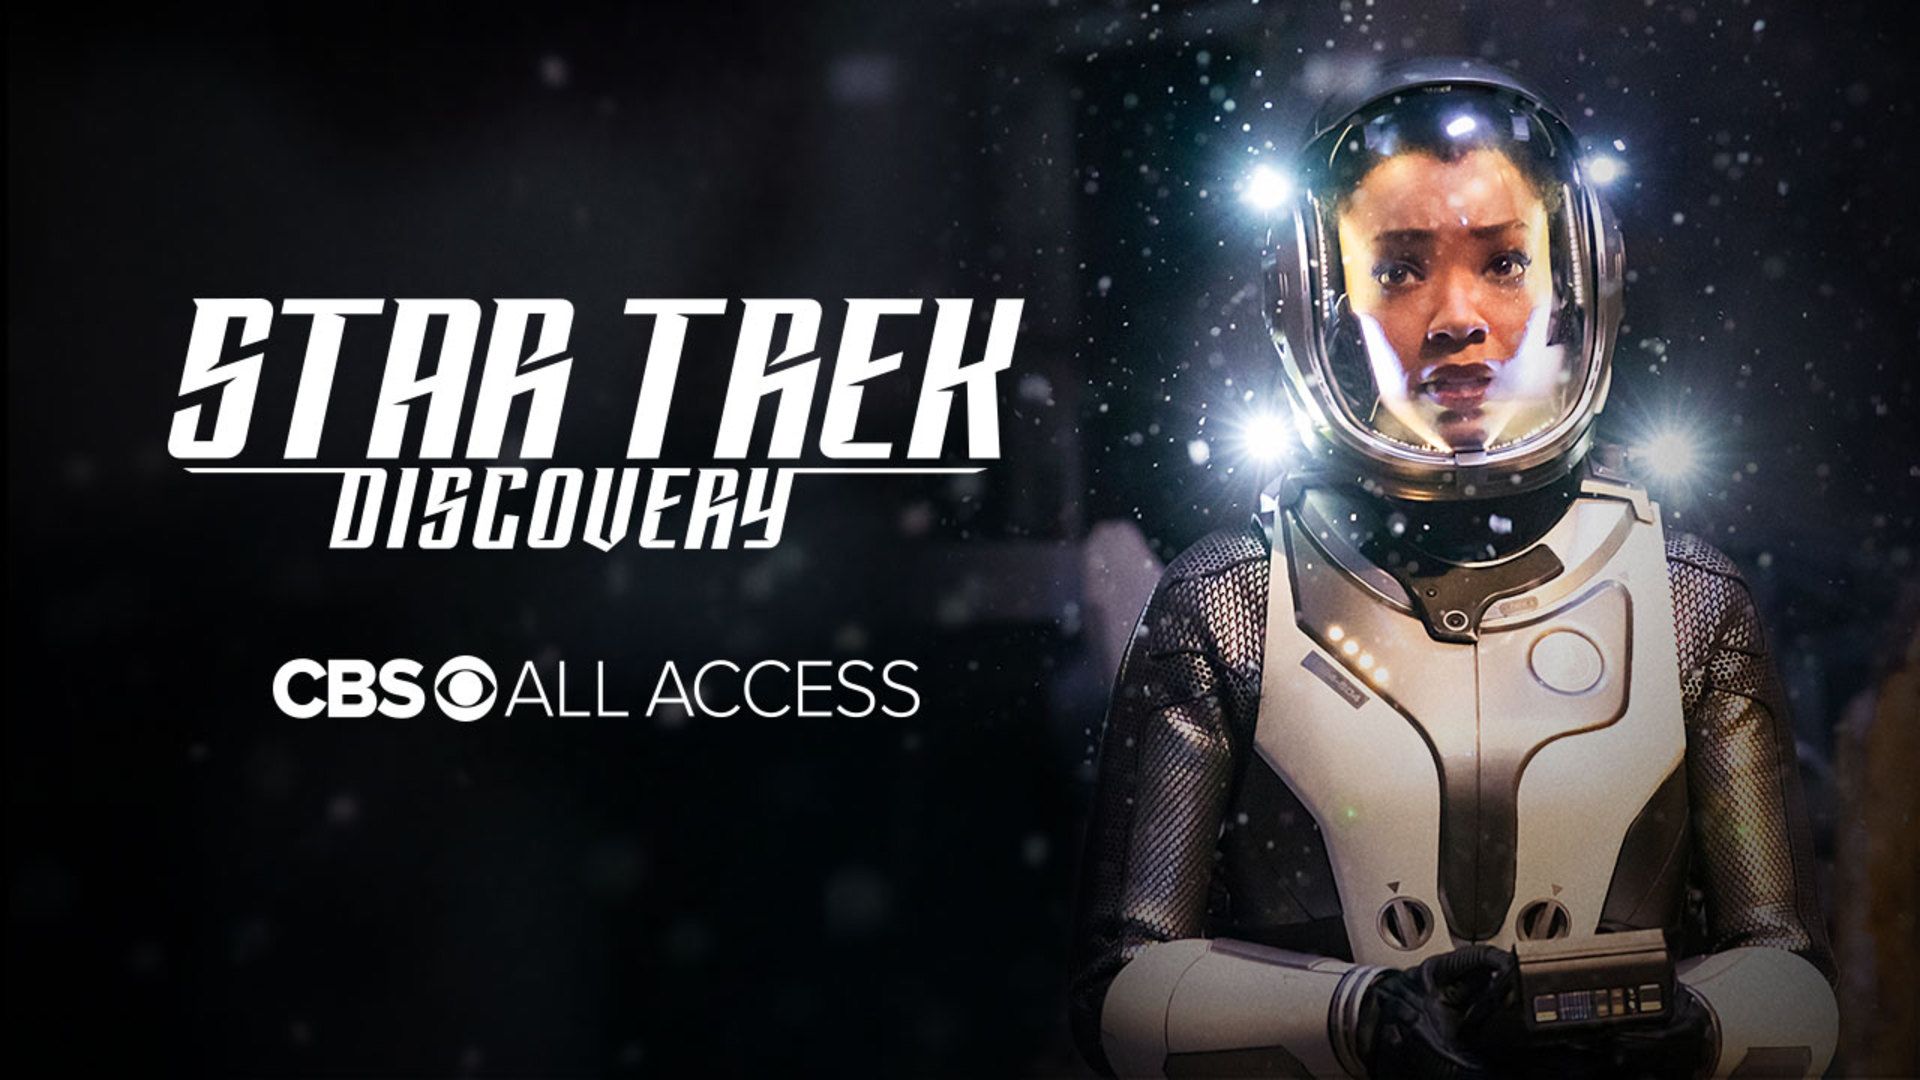 Watch Star Trek: Discovery: Star Trek: Discovery Two Premiere Look Show On CBS All Access